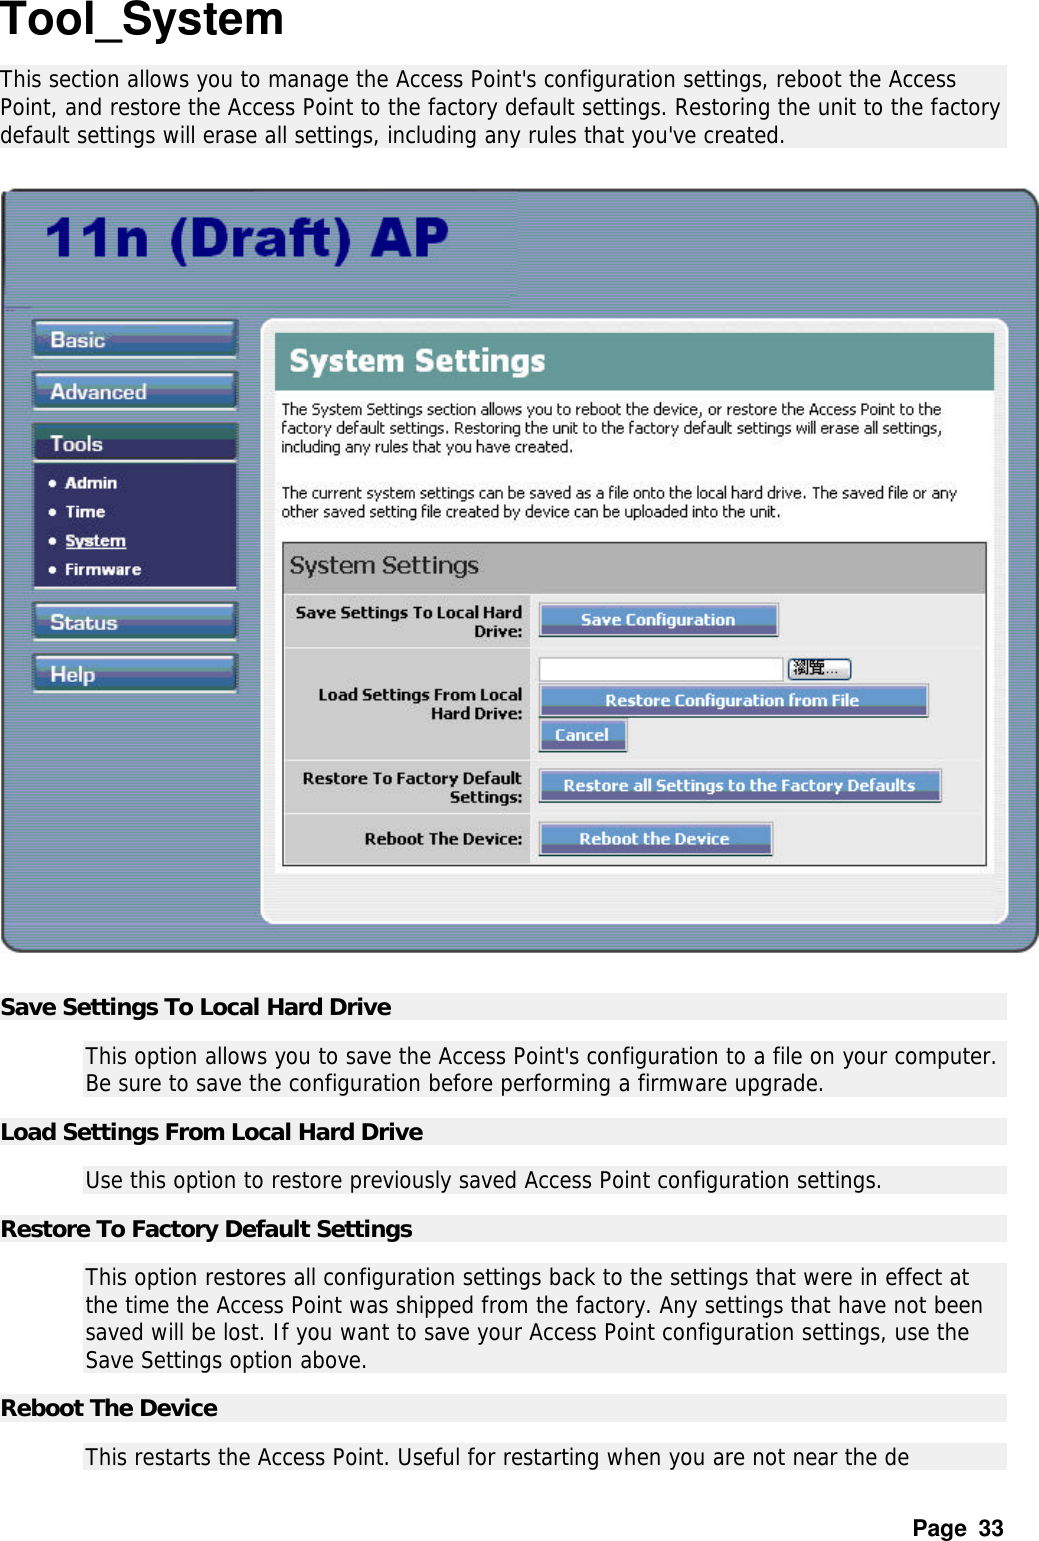 Page  33 Tool_System This section allows you to manage the Access Point&apos;s configuration settings, reboot the Access Point, and restore the Access Point to the factory default settings. Restoring the unit to the factory default settings will erase all settings, including any rules that you&apos;ve created.    Save Settings To Local Hard Drive   This option allows you to save the Access Point&apos;s configuration to a file on your computer. Be sure to save the configuration before performing a firmware upgrade.  Load Settings From Local Hard Drive   Use this option to restore previously saved Access Point configuration settings.  Restore To Factory Default Settings   This option restores all configuration settings back to the settings that were in effect at the time the Access Point was shipped from the factory. Any settings that have not been saved will be lost. If you want to save your Access Point configuration settings, use the Save Settings option above.  Reboot The Device   This restarts the Access Point. Useful for restarting when you are not near the de 